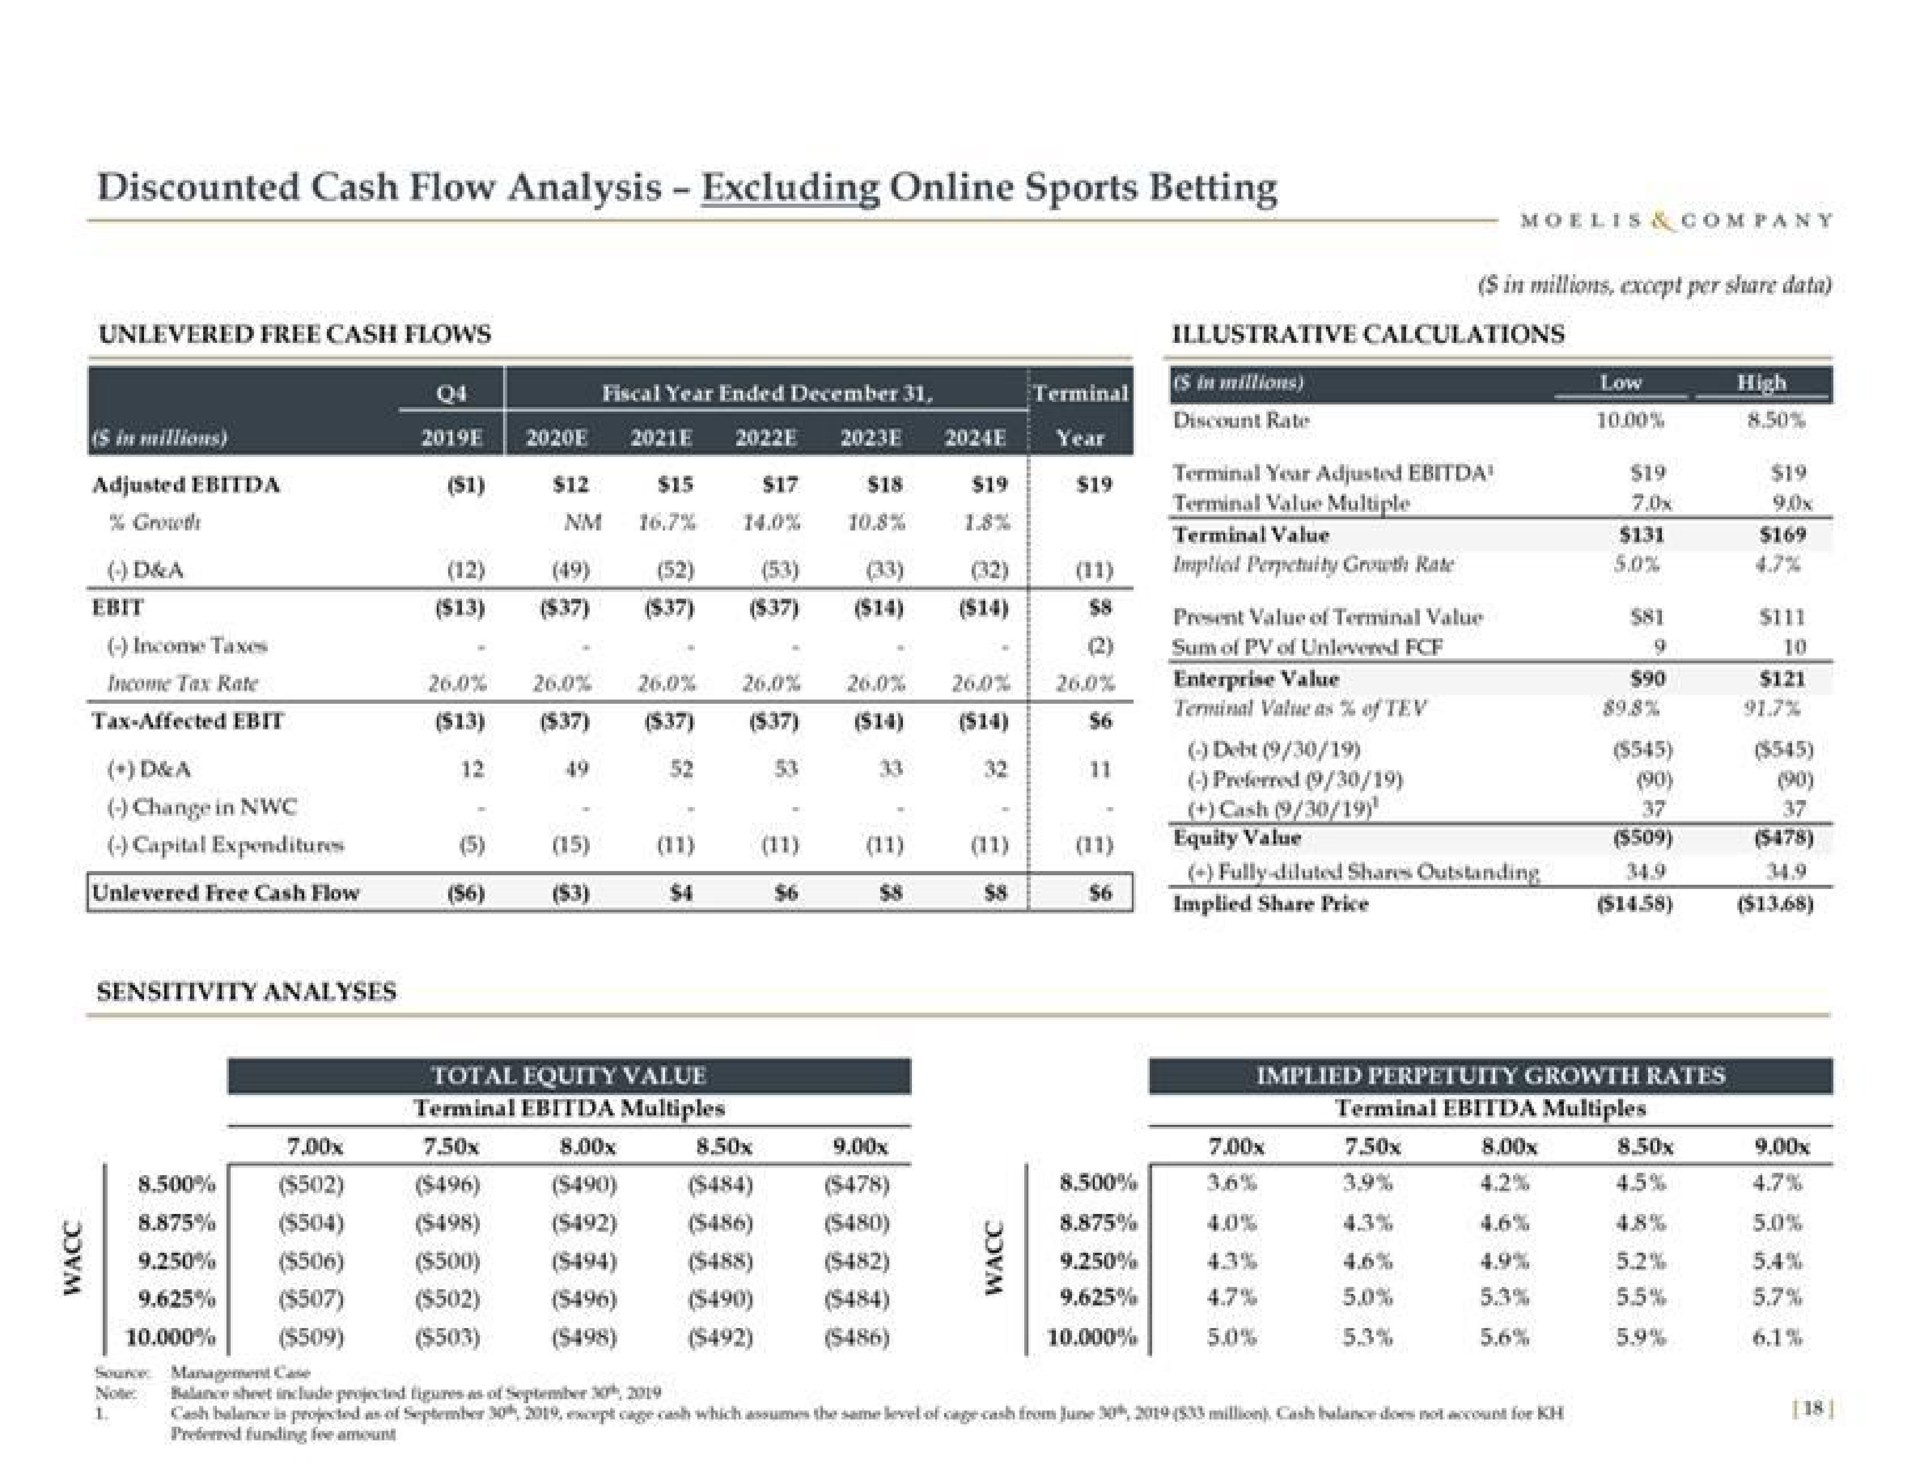 discounted cash flow analysis excluding sports betting adjusted tax affected am a stay terminal your terminal value terminal of a i i | Moelis & Company